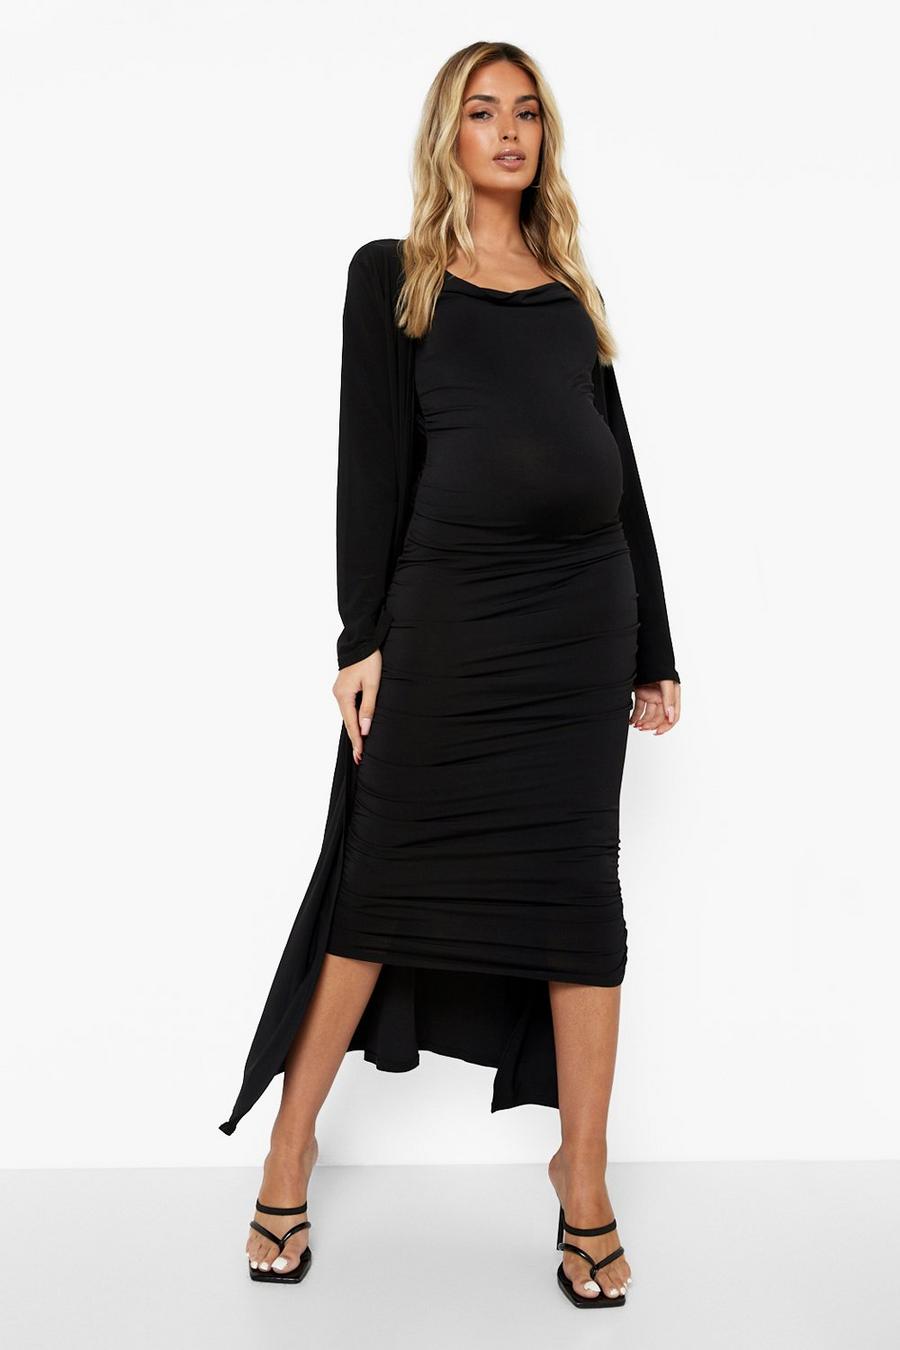 Black negro Maternity Strappy Cowl Neck Dress And Duster Coat